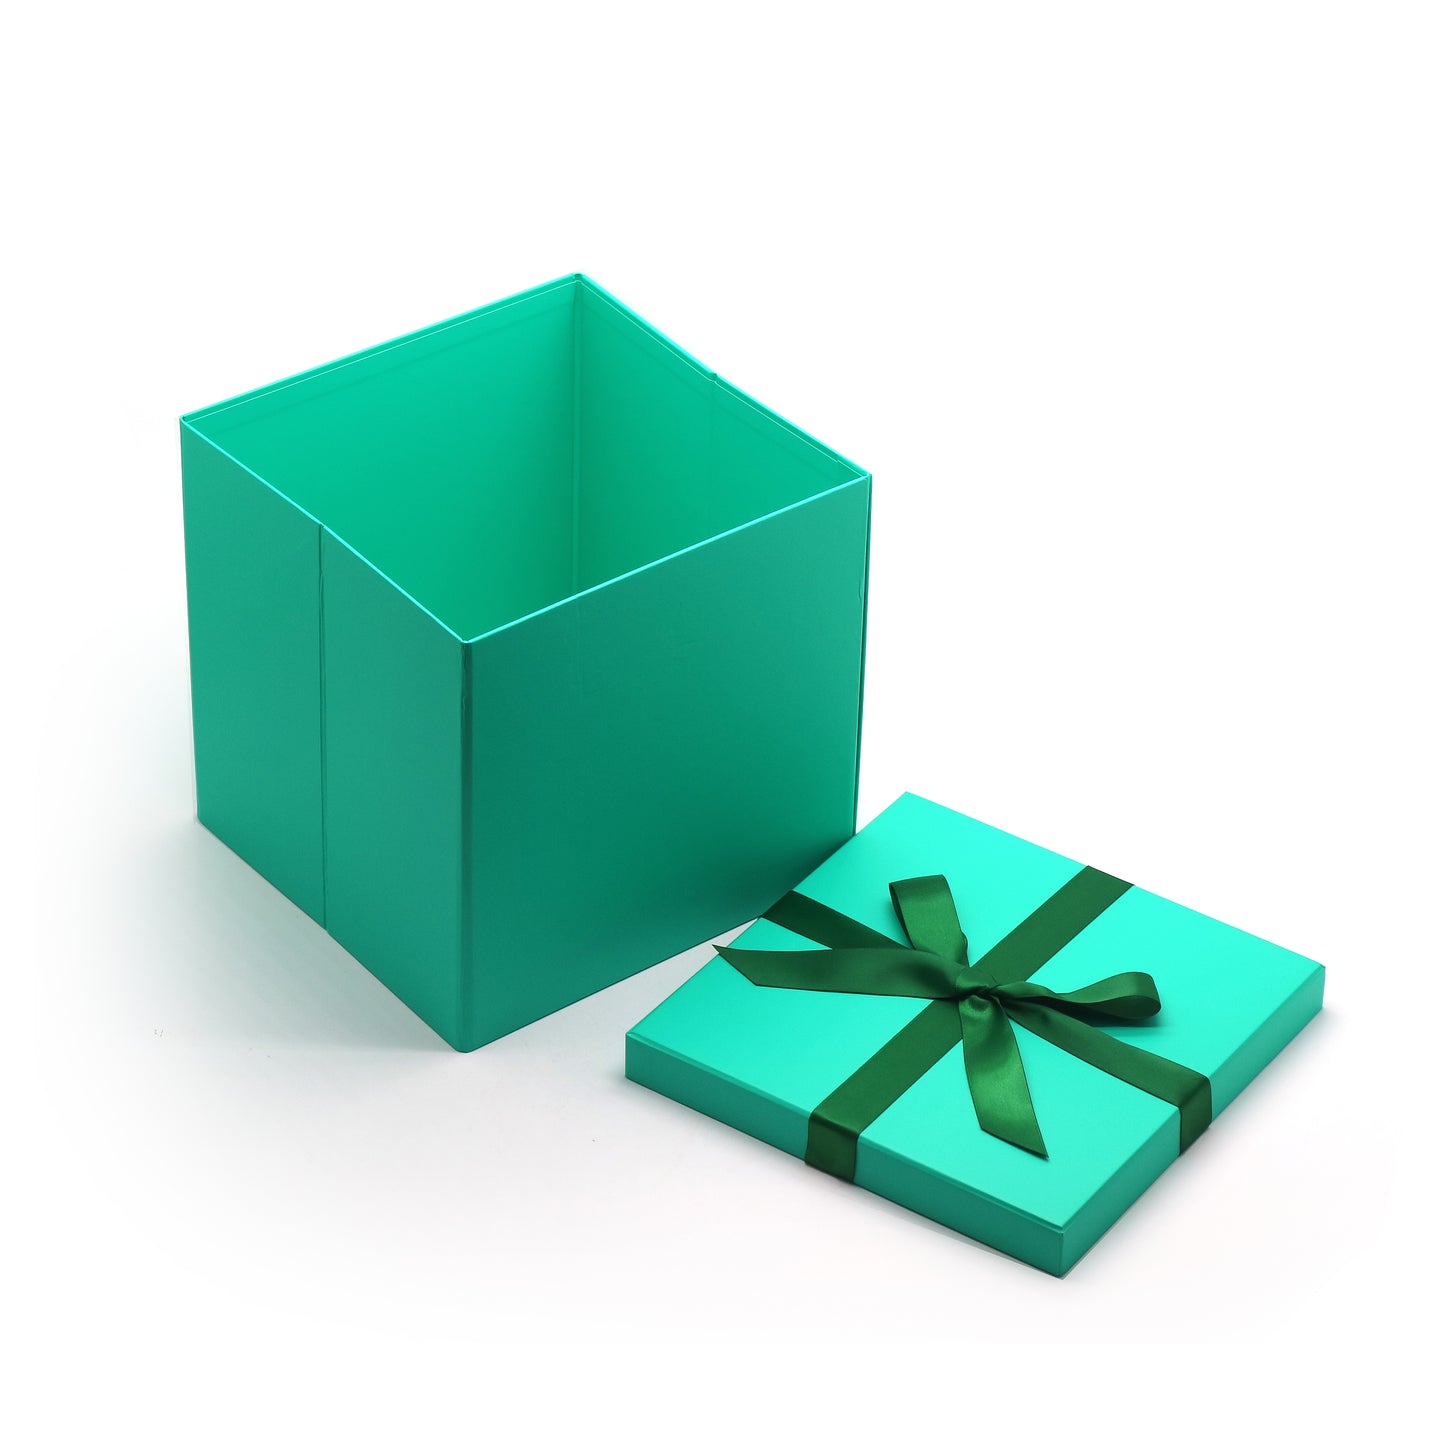 AVUX 9-inches Empty Gift Box with Lids and Ribbon- A Rigid Cardboard Green Colored Collapsible Gift Box for Birthday, Christmas, and Weddings